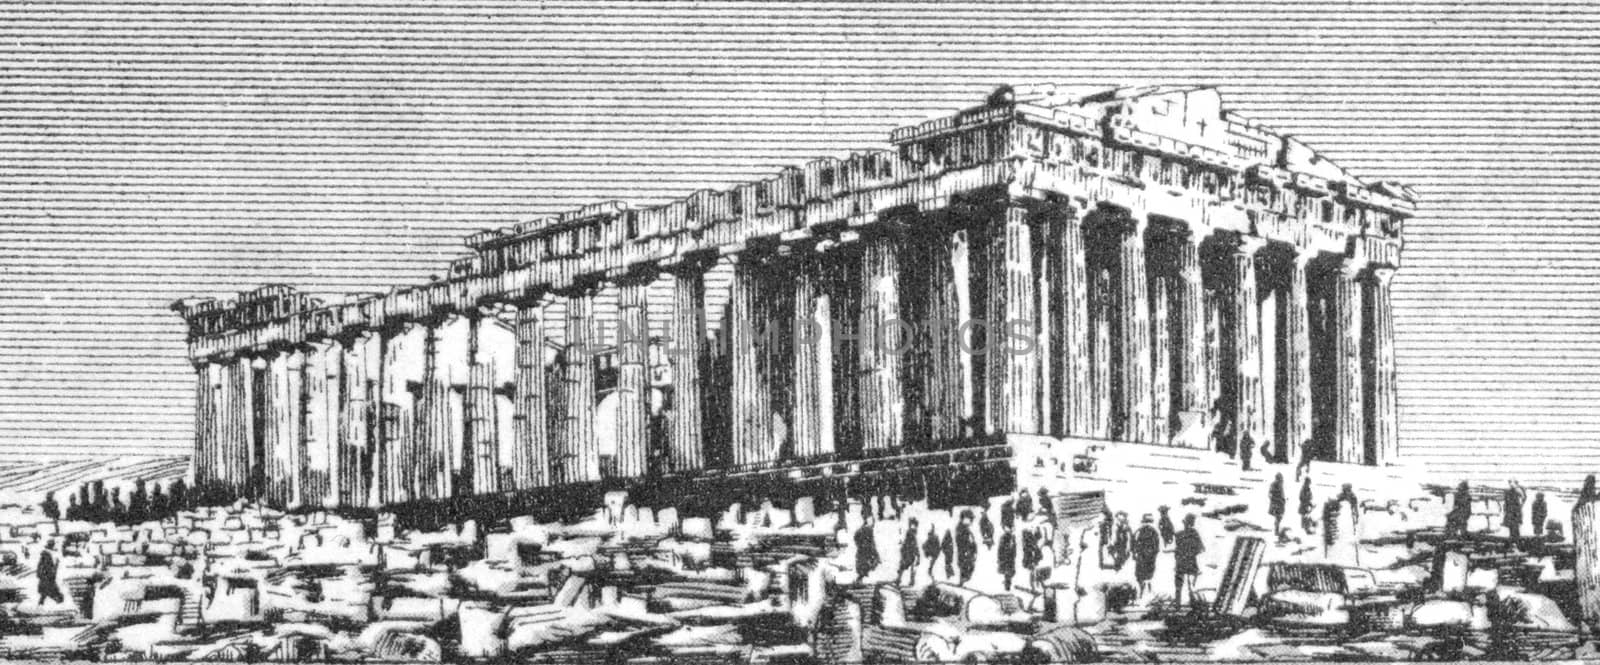 Parthenon on 20 Drachmai 1940 banknote from Greece.
Temple of the Greek goddess Athena, built in the 5th century BC on the Athenian Acropolis.